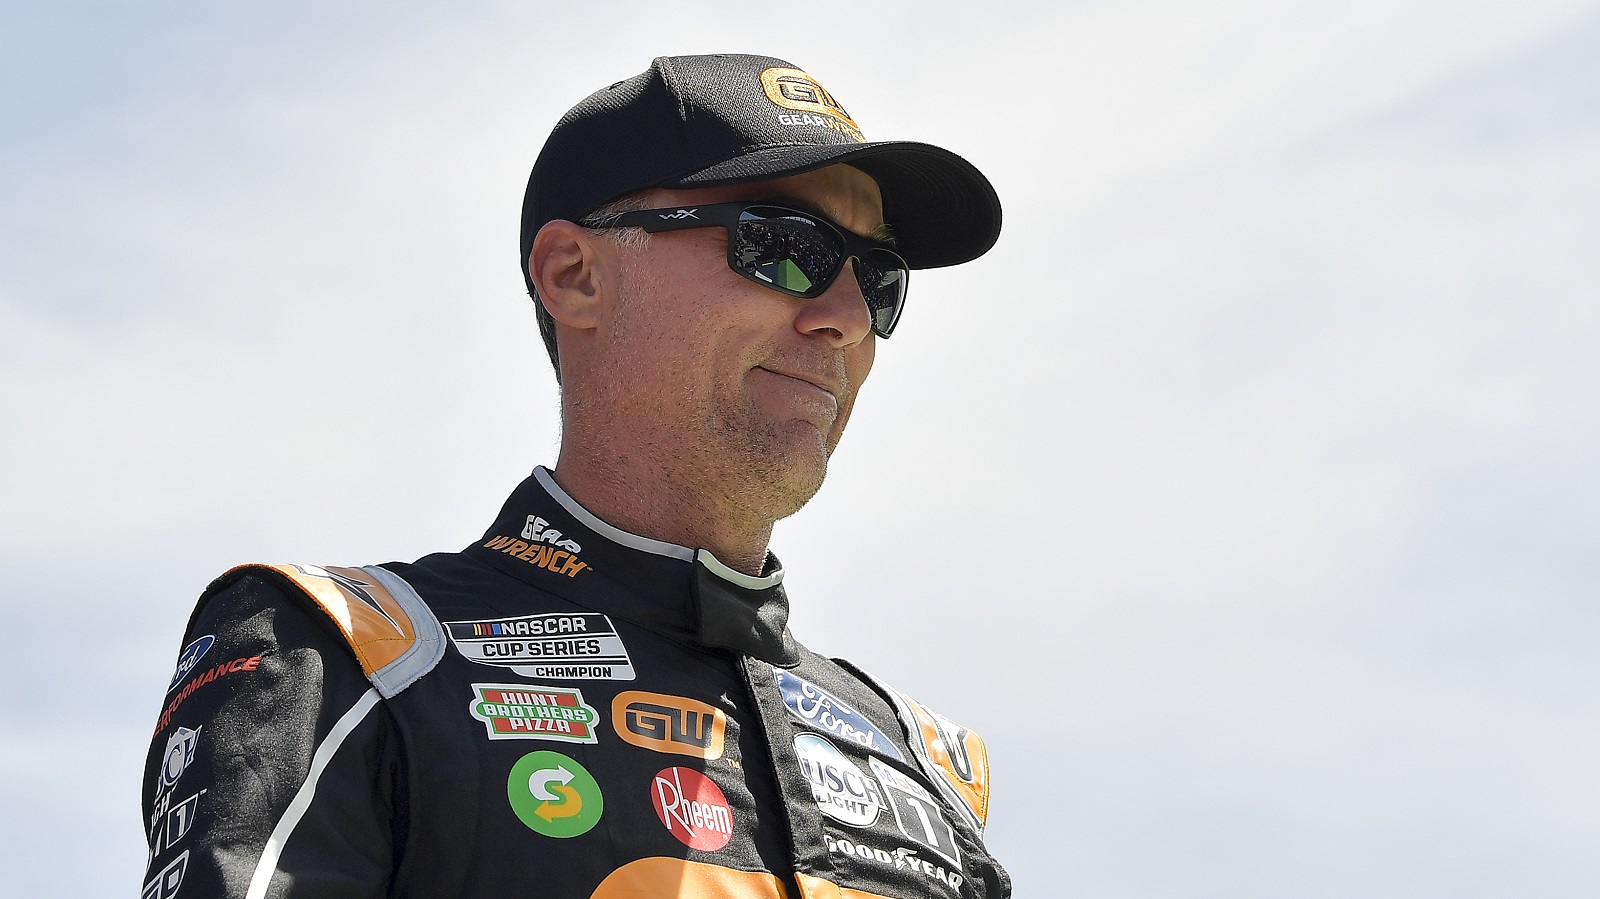 Kevin Harvick Shifts Unwanted Attention Onto Chris Buescher and Ricky Stenhouse Jr.